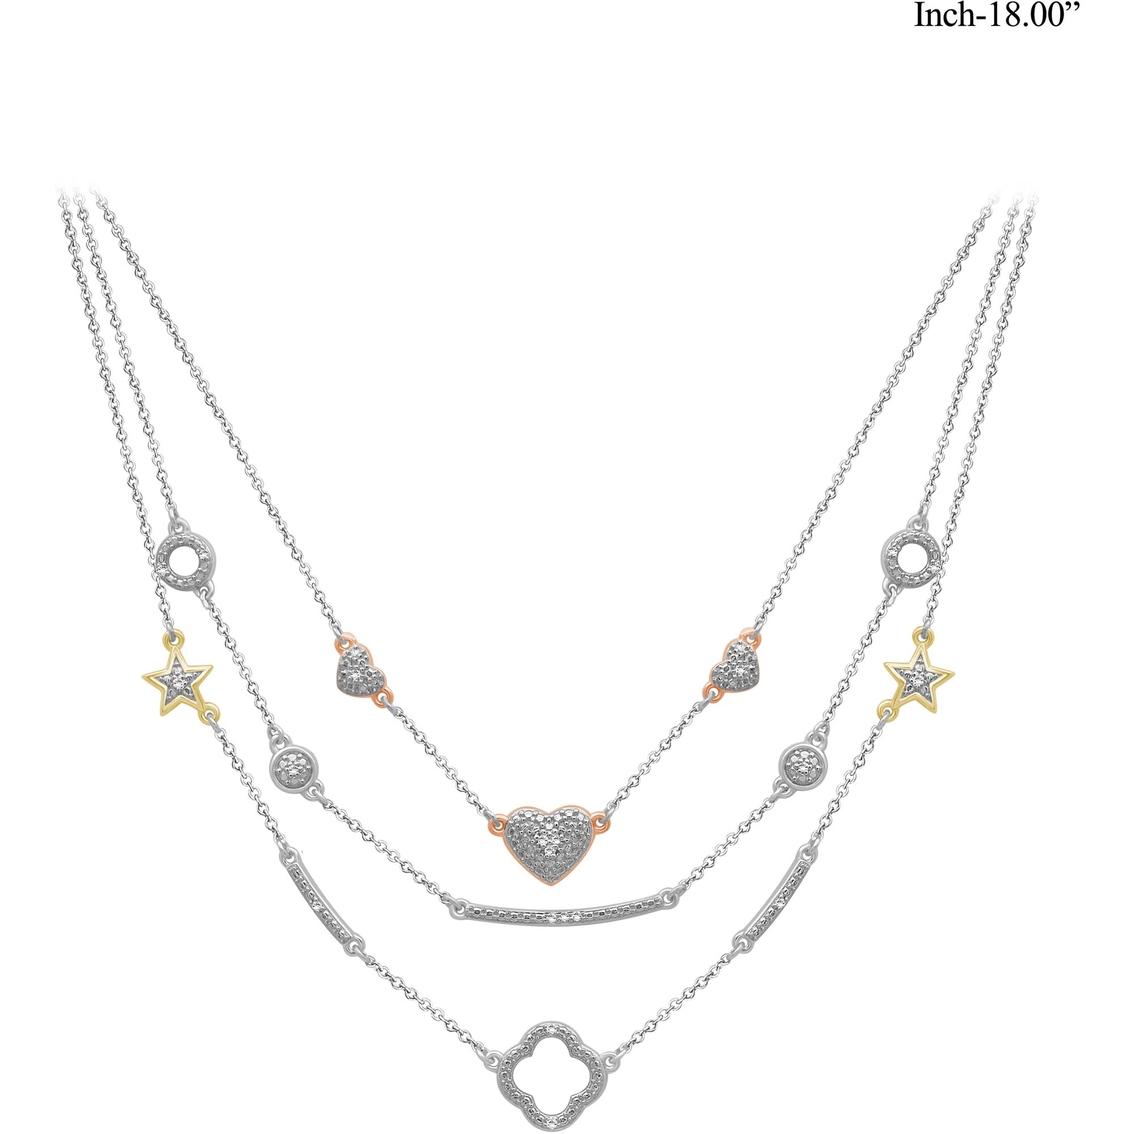 She Shines 14K Gold Over Sterling Silver 1/10 CTW Diamond Layered Necklace 18 in. - Image 2 of 3